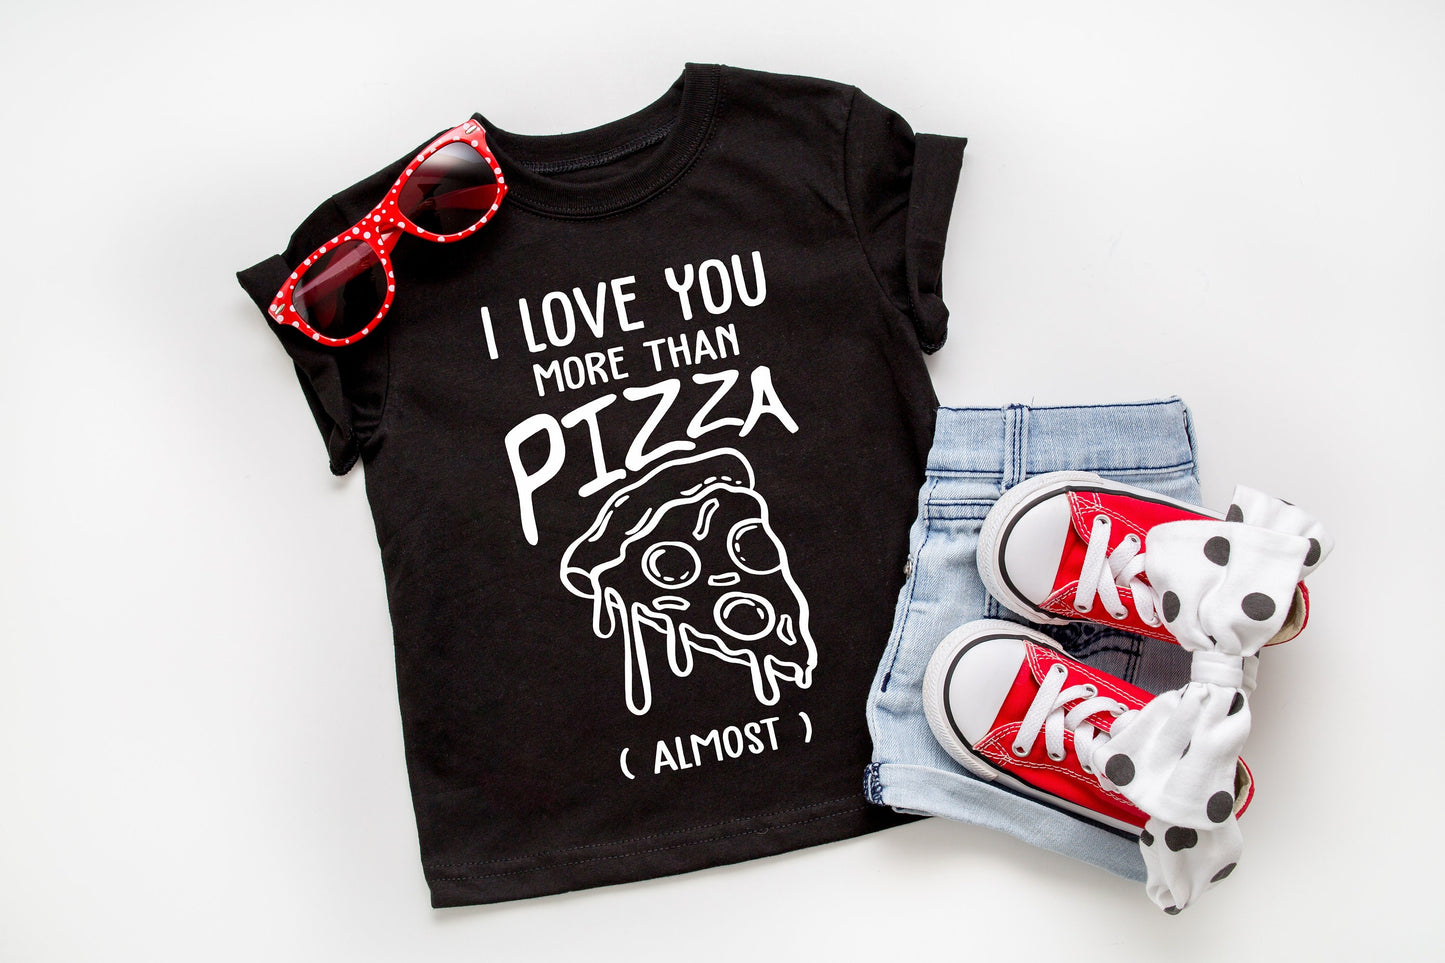 I Love You More Than Pizza (almost) Shirt - Cute Kids Shirt - toddler boy shirt - valentines day shirt - pizza lover shirt